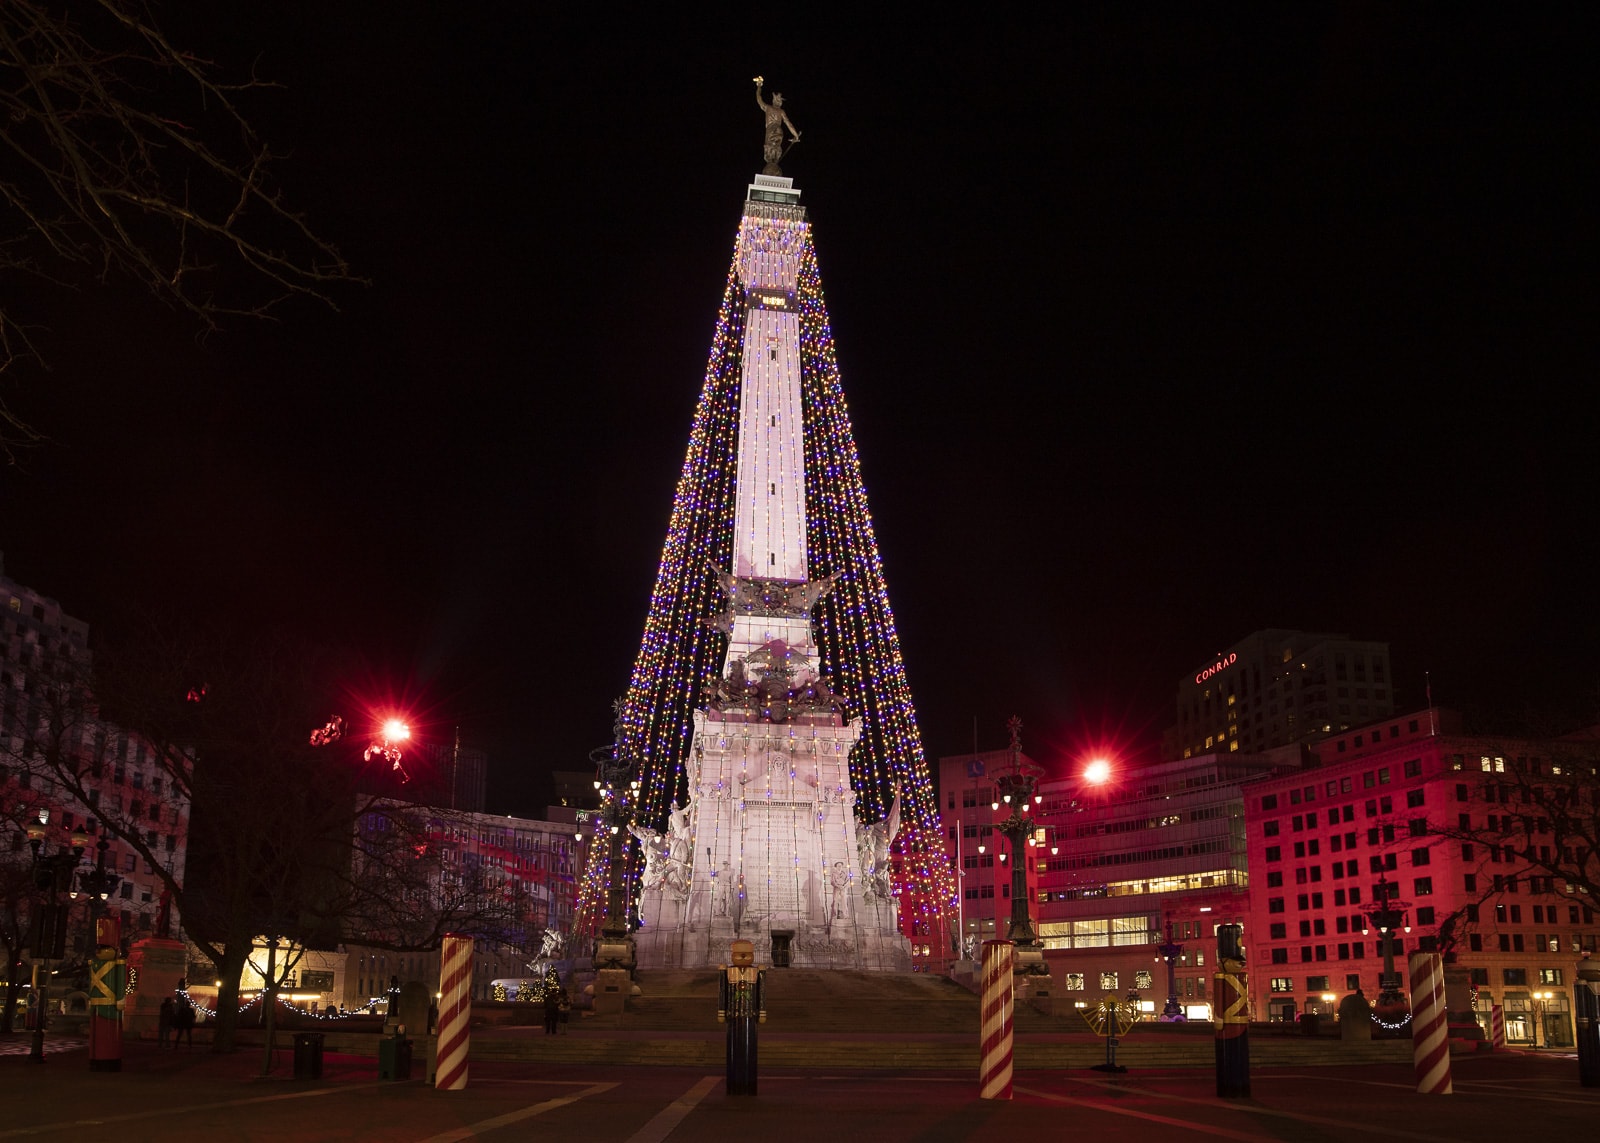 Indianapolis Circle of Lights at Night with red lights